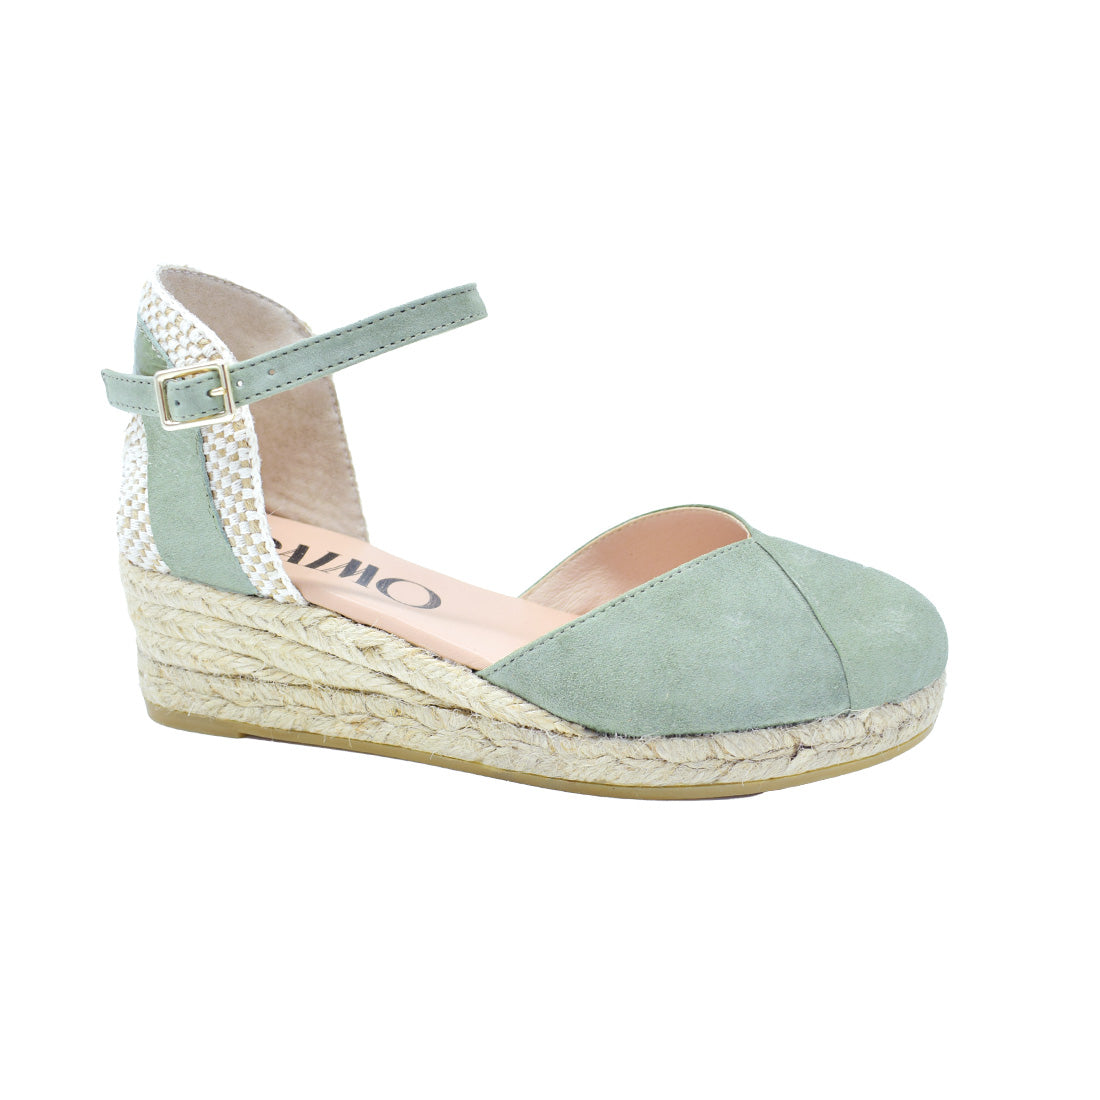 Green espadrilles low wedges handmade in Suede, jute and raffia comfortable shoes